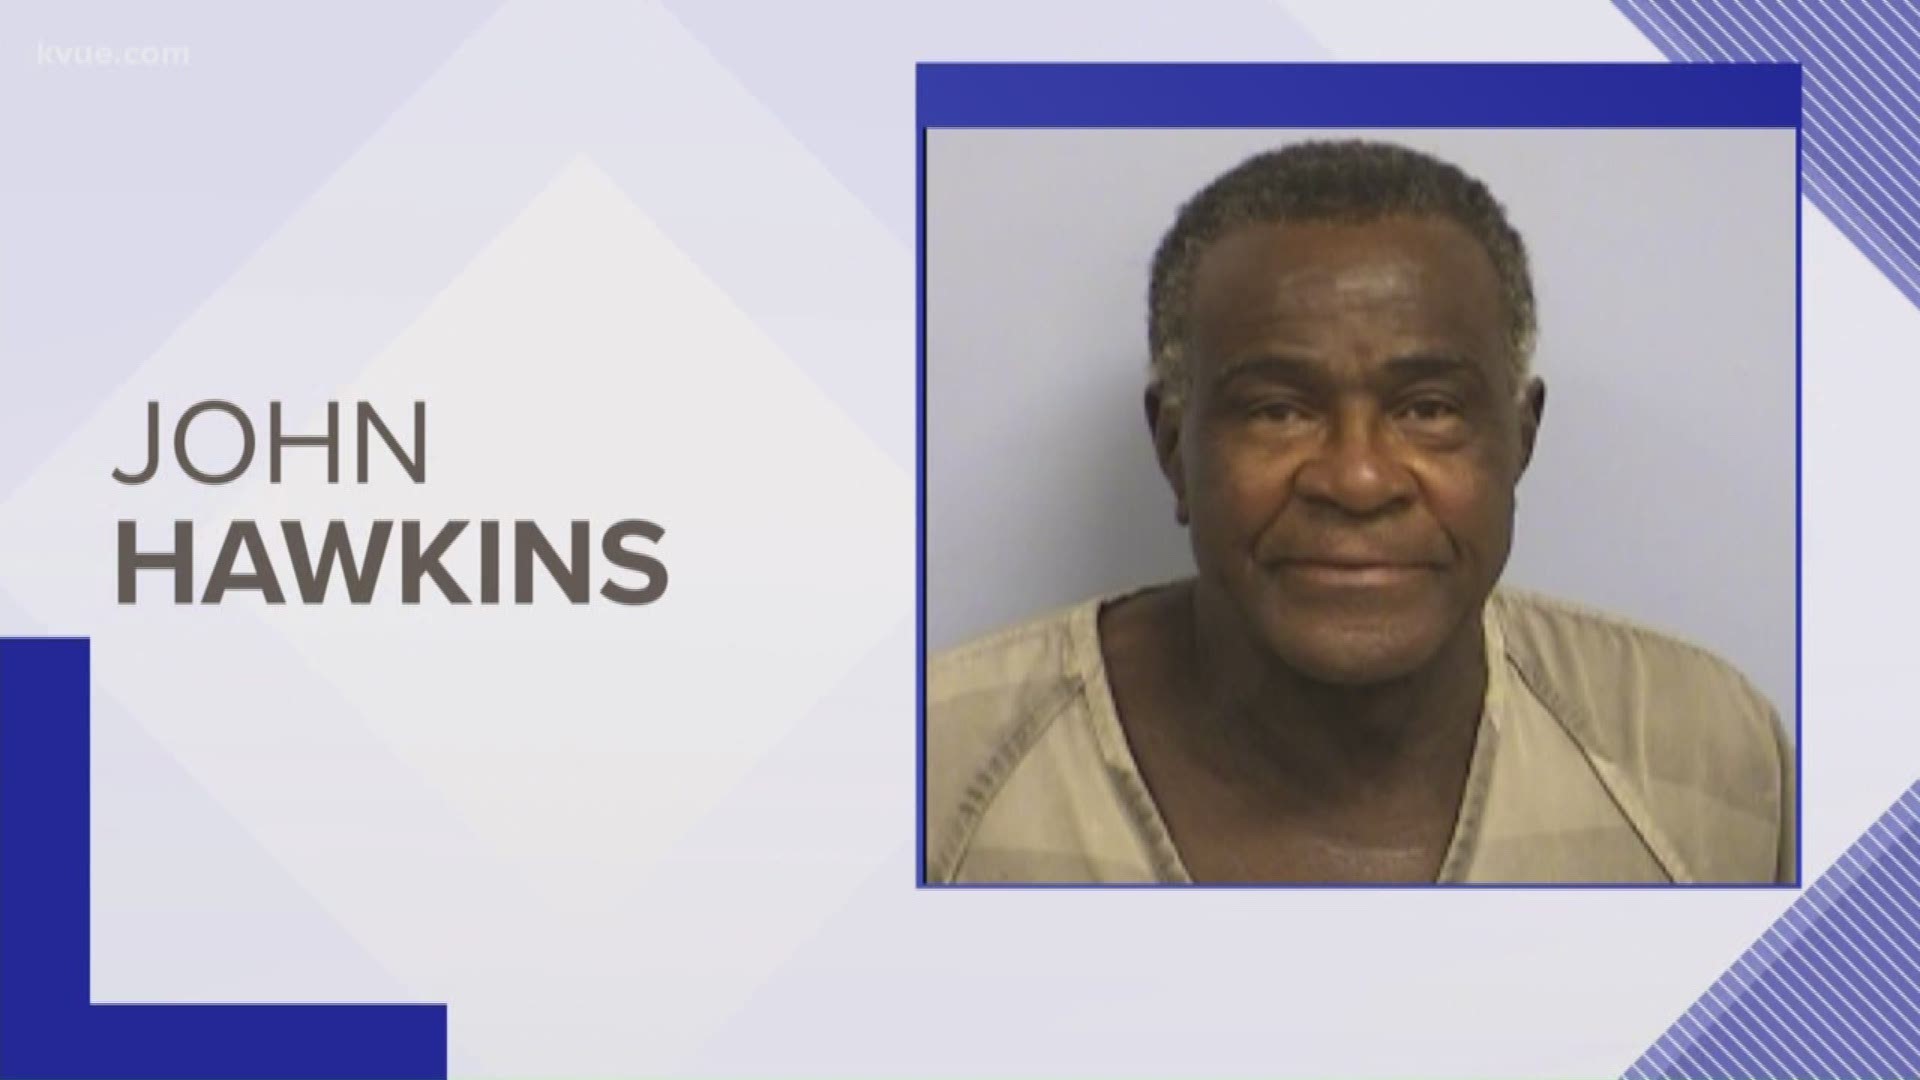 John Hawkins, 75, is now charged with murder after a deadly shooting in Southeast Austin.